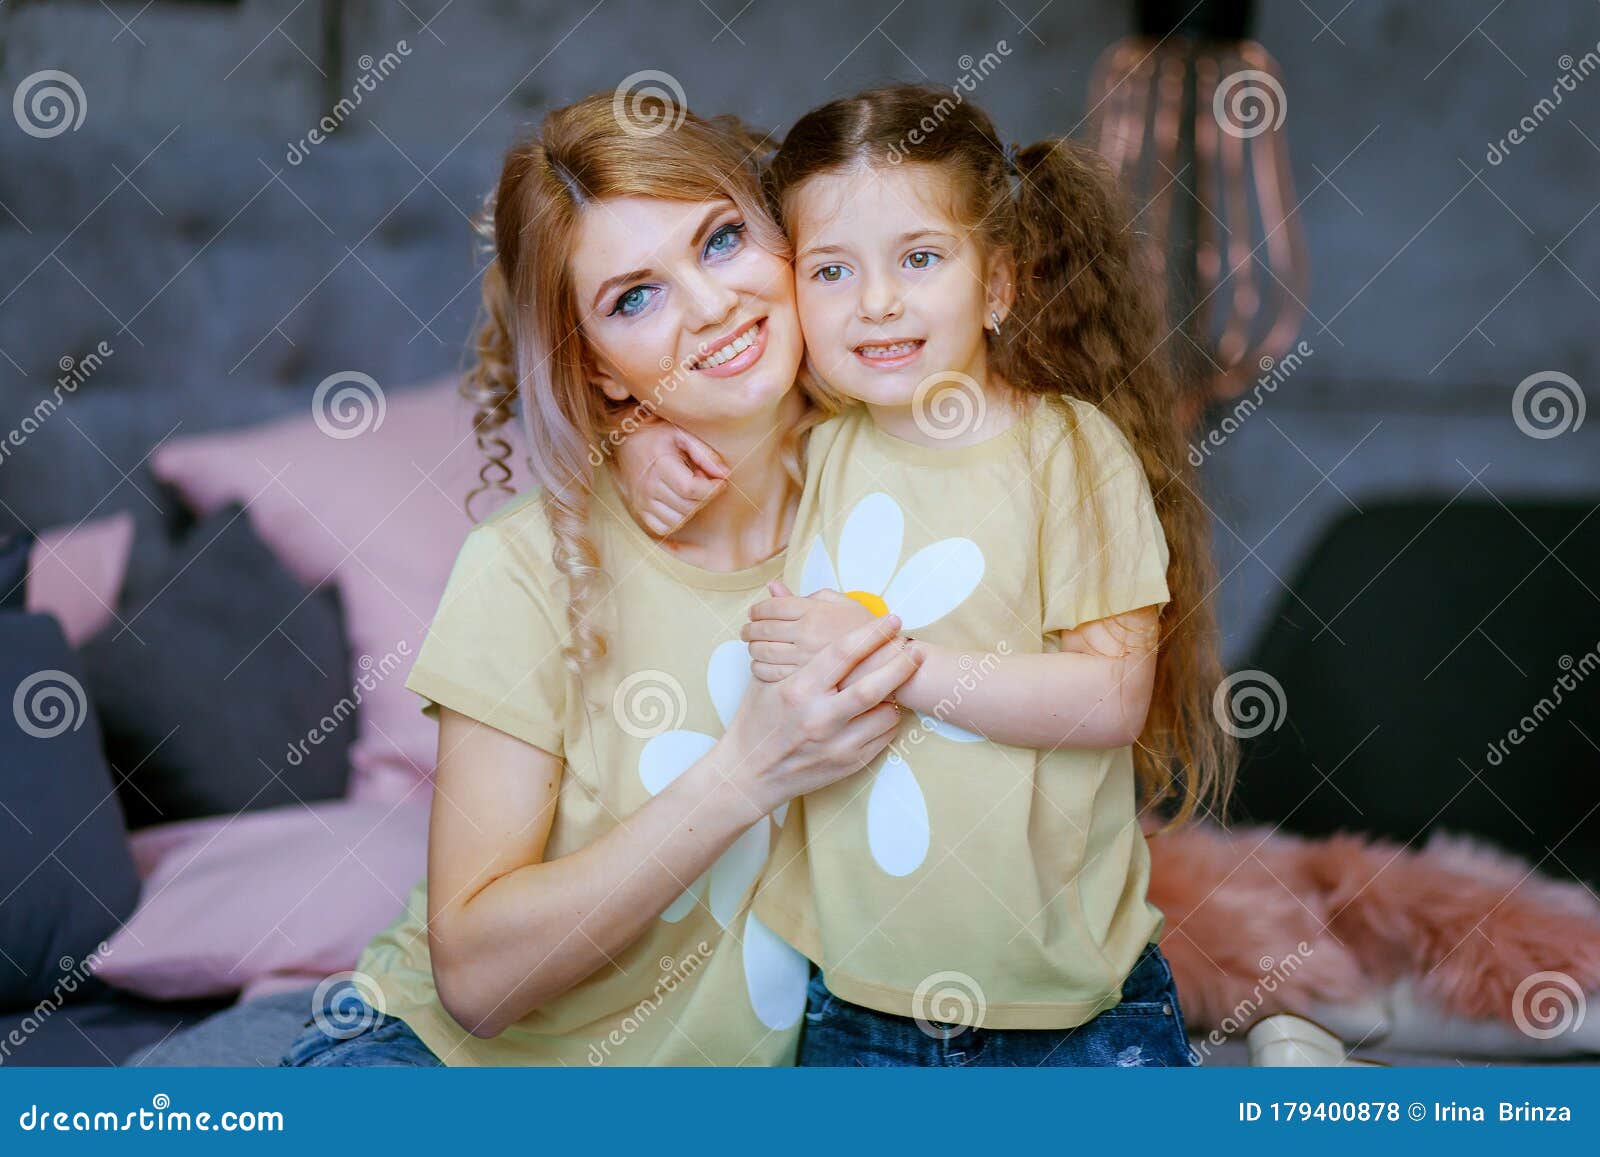 Happy Mom and Daughter Cuddling Playing at Home Stock Photo - Image of ...